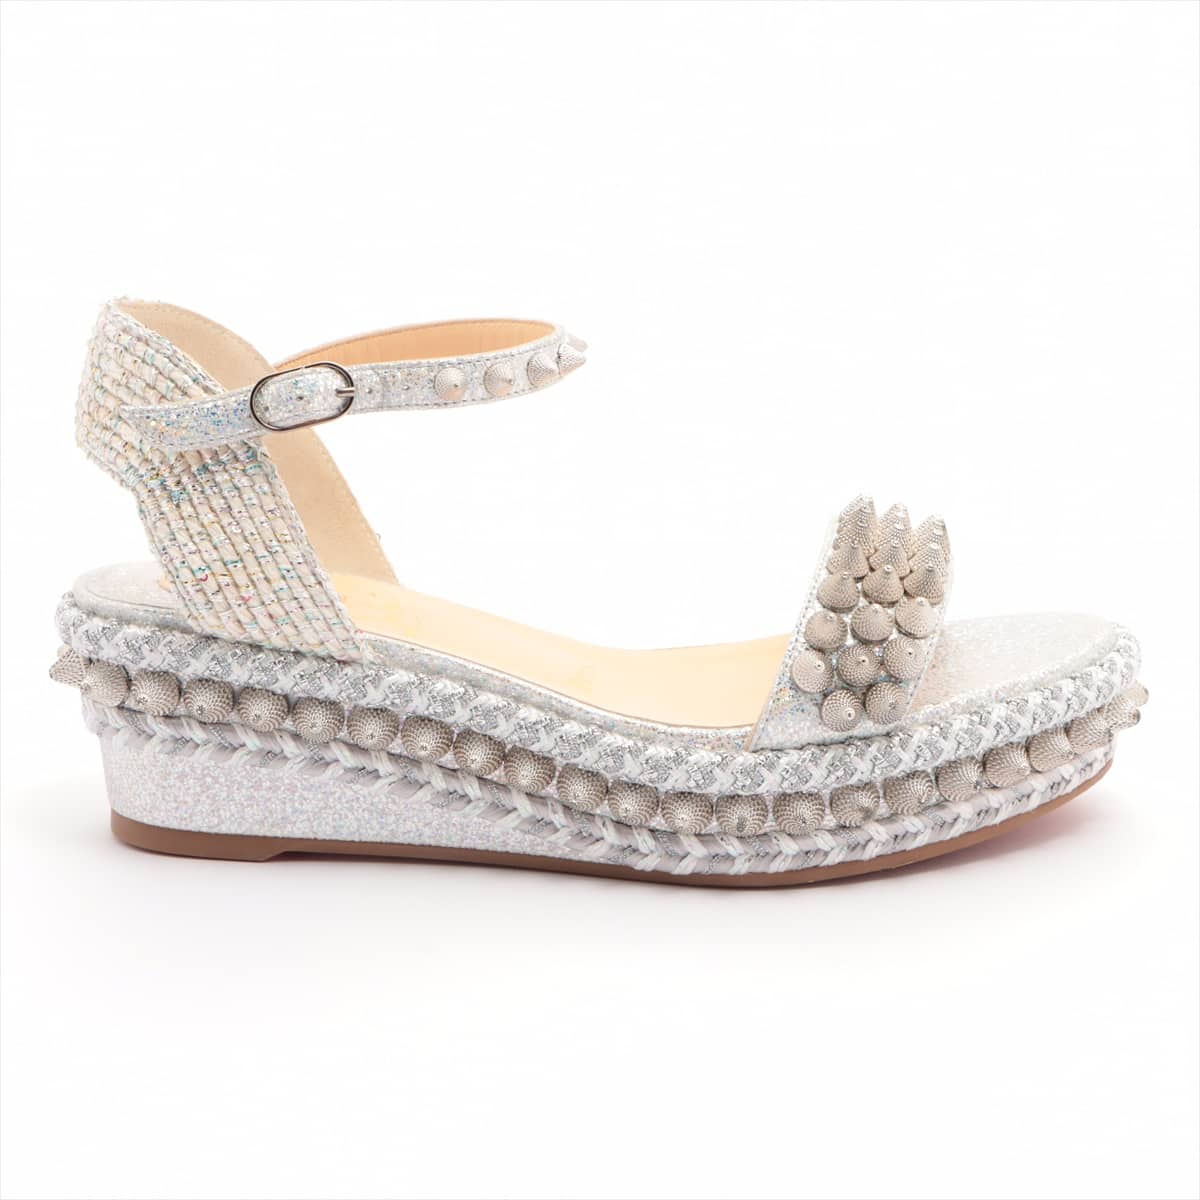 Christian Louboutin Leather Sandals 36 Ladies' Silver Studs